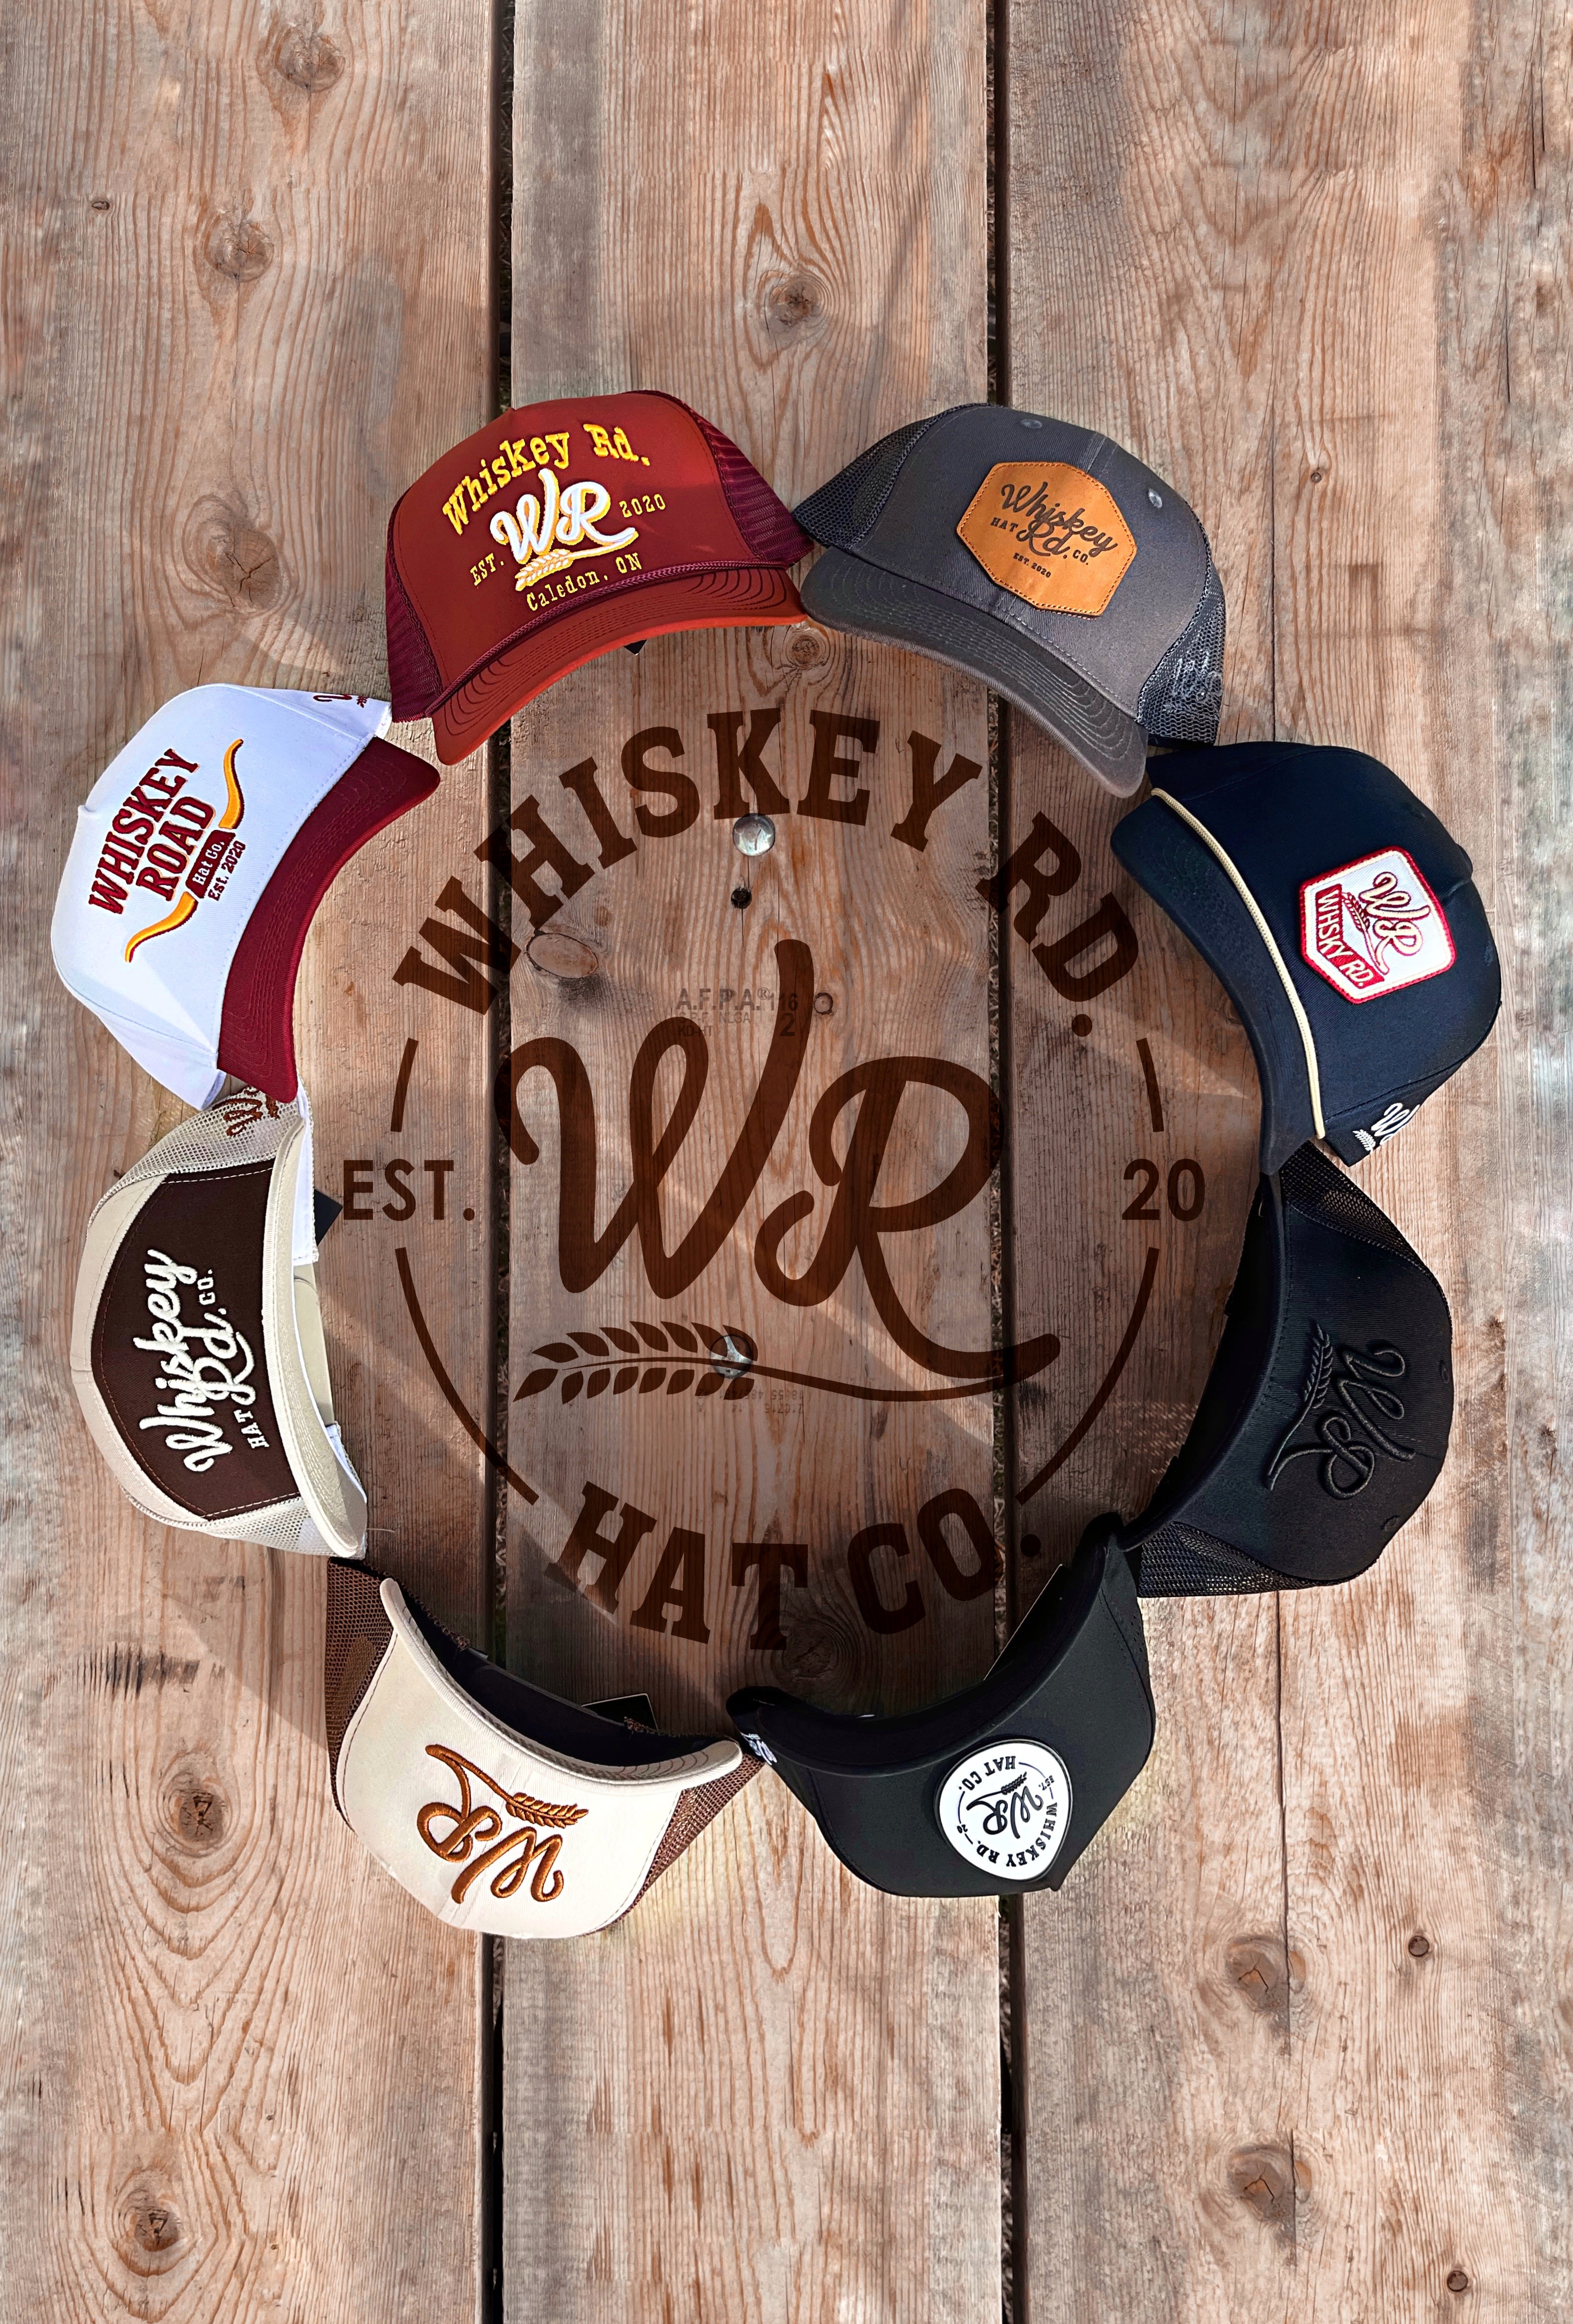 Whiskey Road Hat Co. - Official Store – Whiskey Road Hat Company